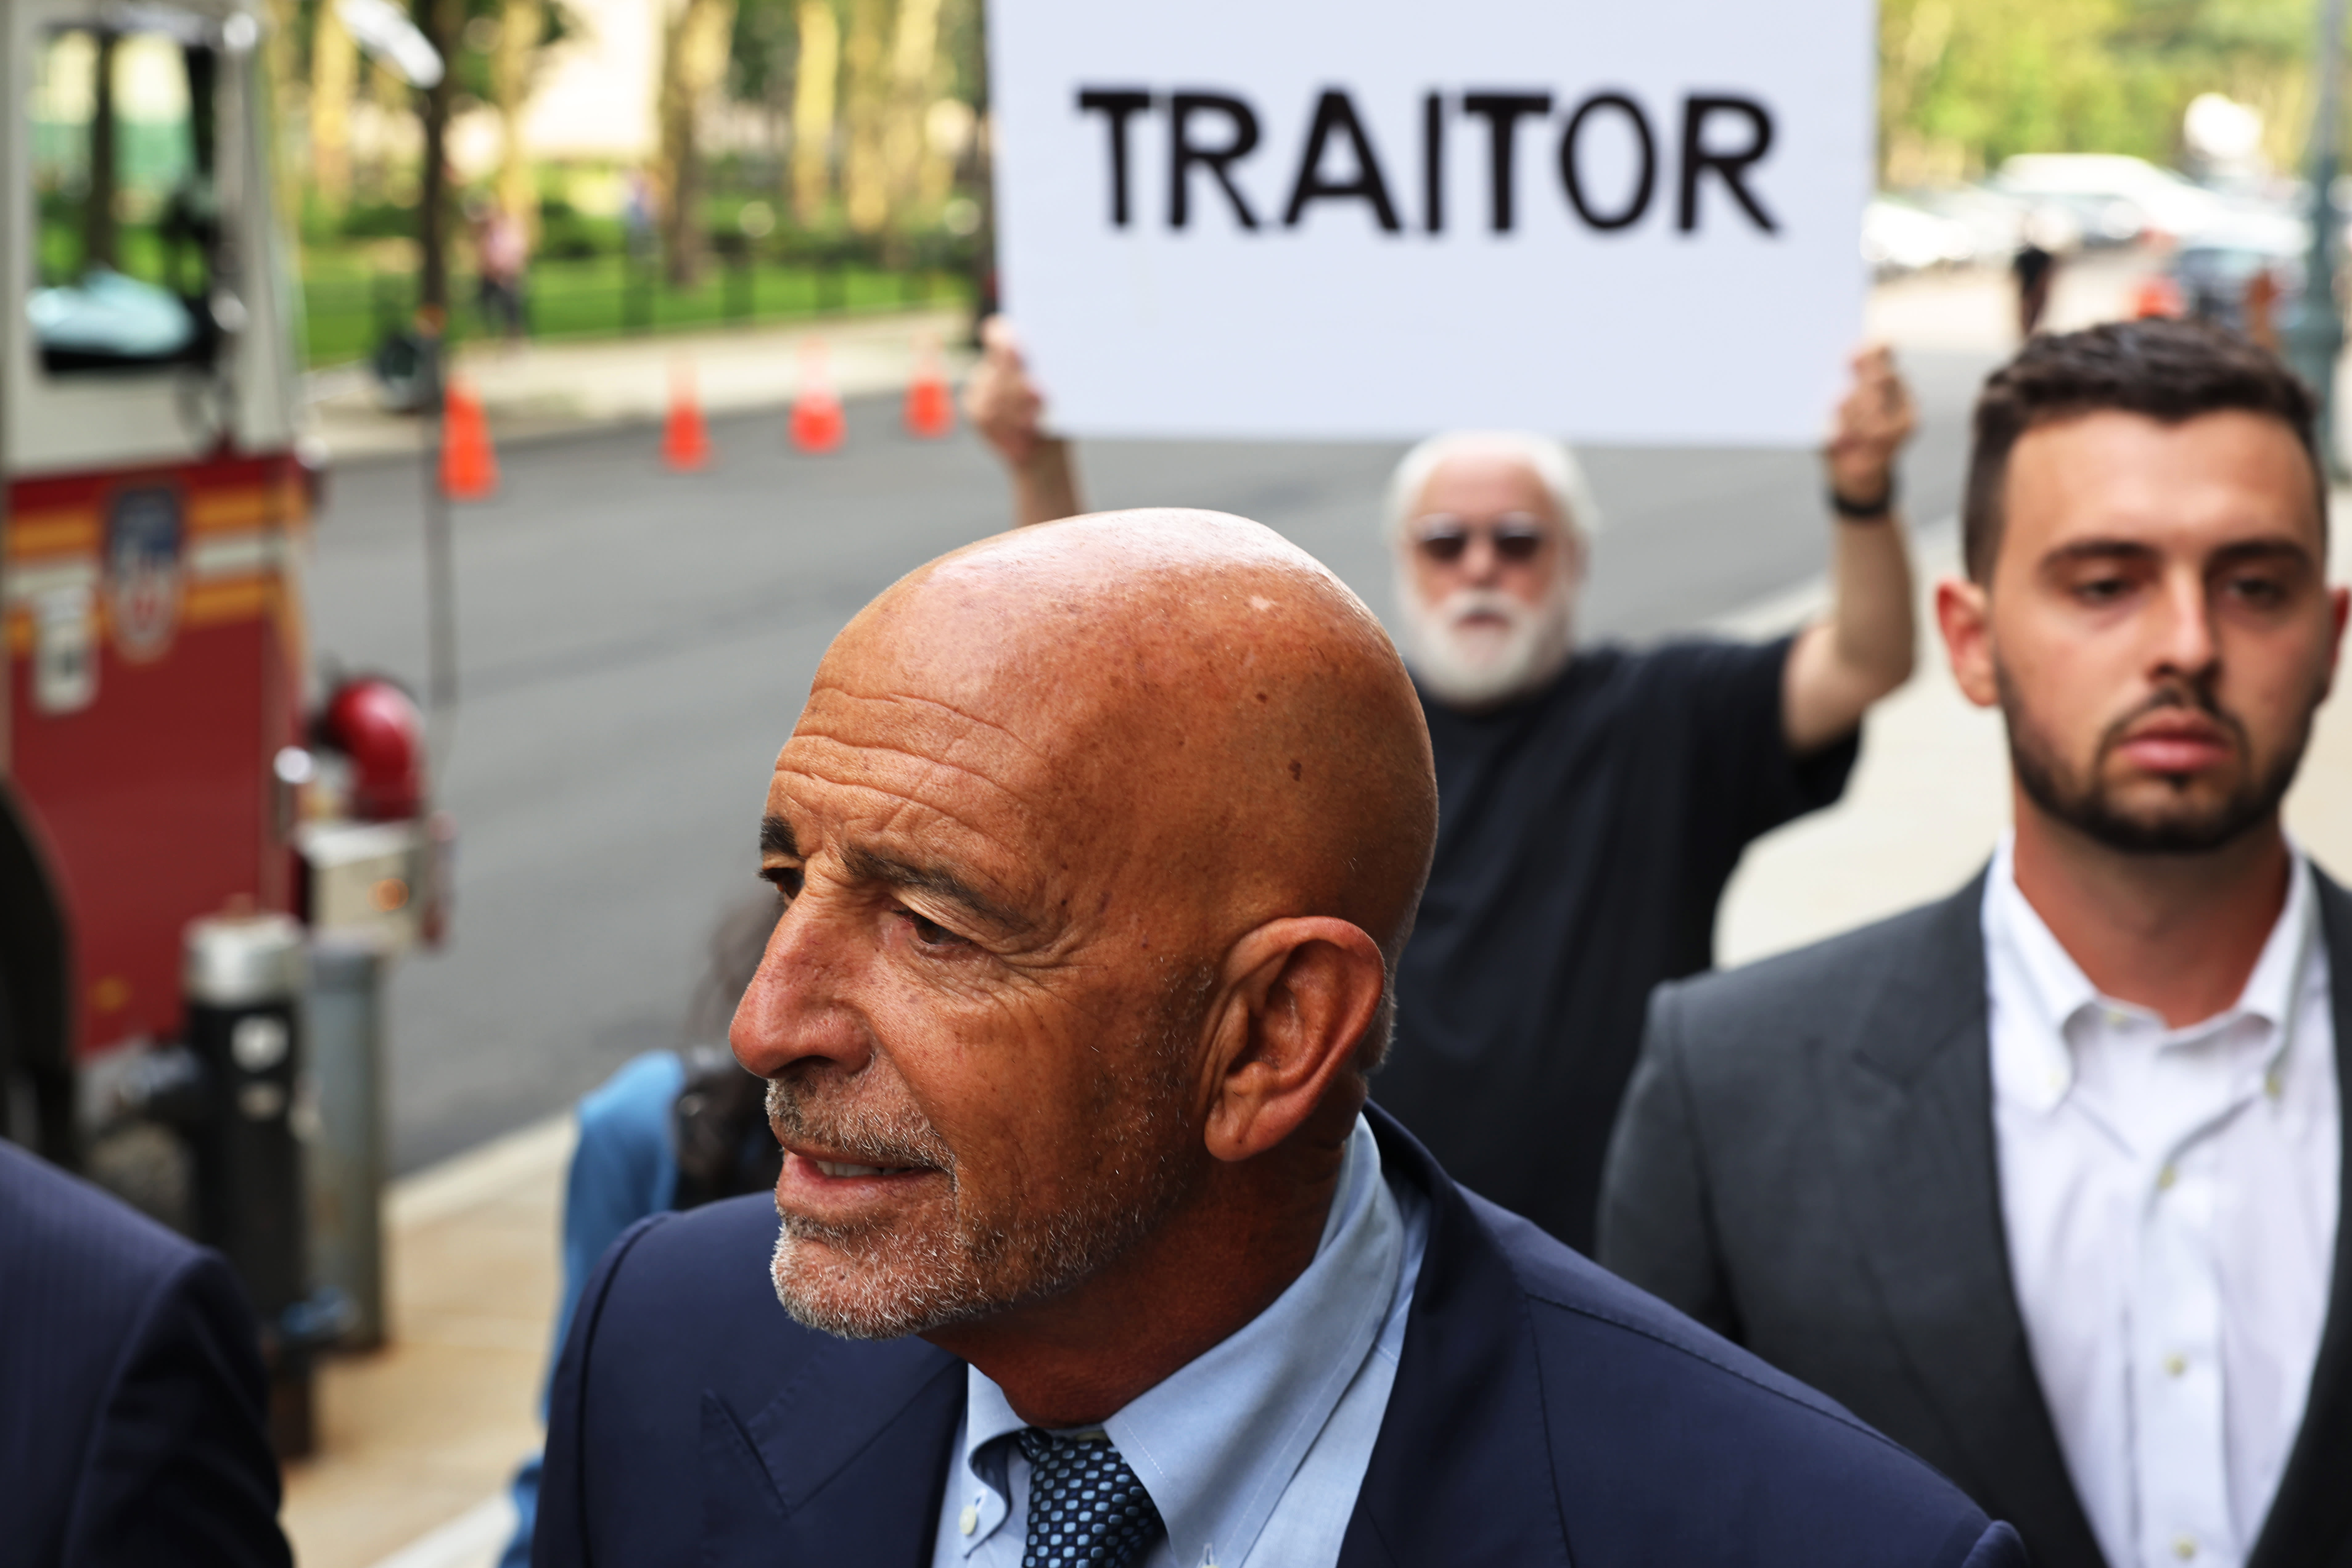 Trump friend Tom Barrack heckled as a 'traitor' as he shows up for arraignment on federal charges